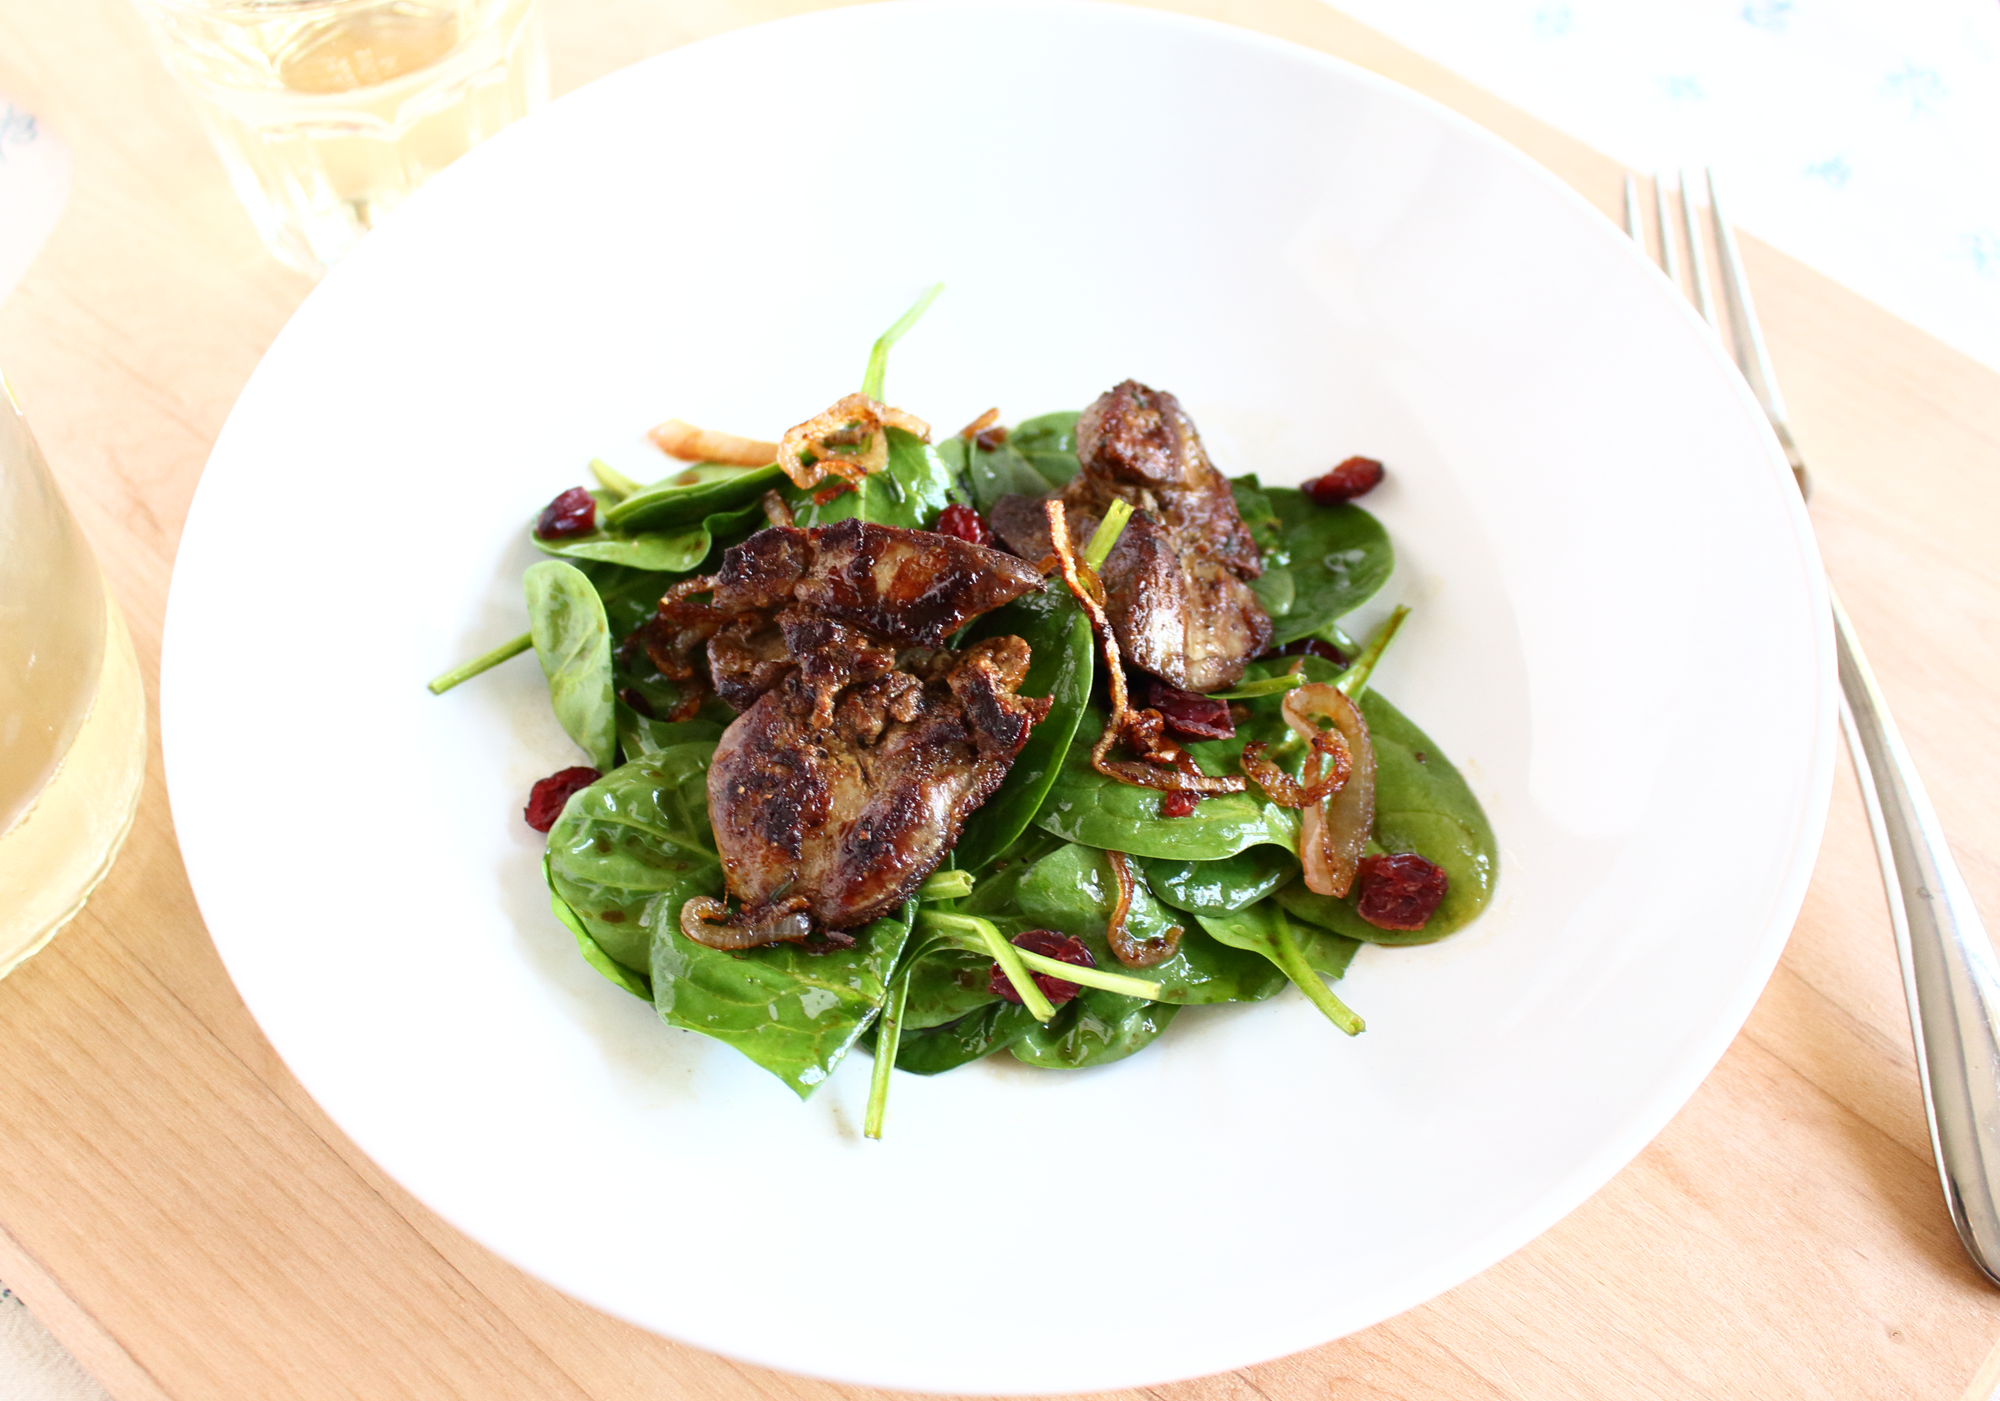 pan roasted chicken liver and spinach salad with shallots and dried cranberries